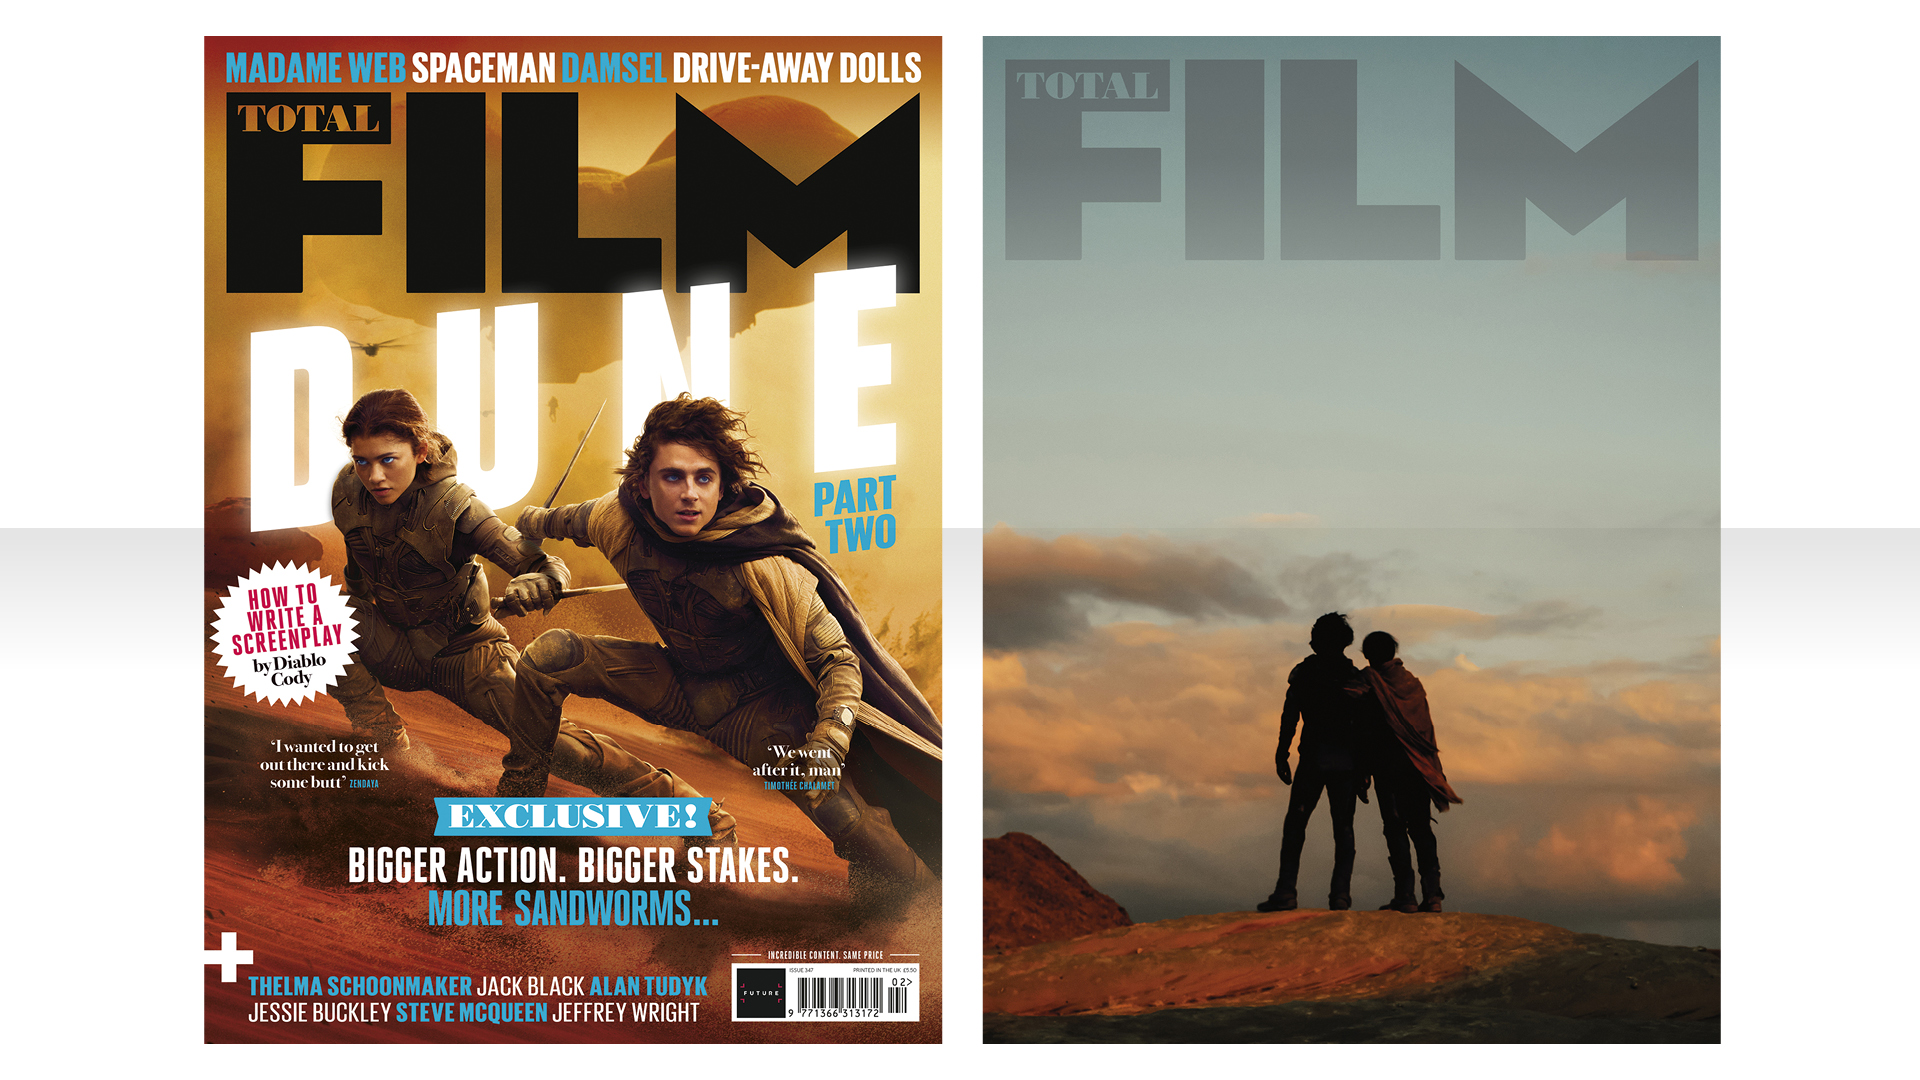 Total Film's Dune: Part Two covers